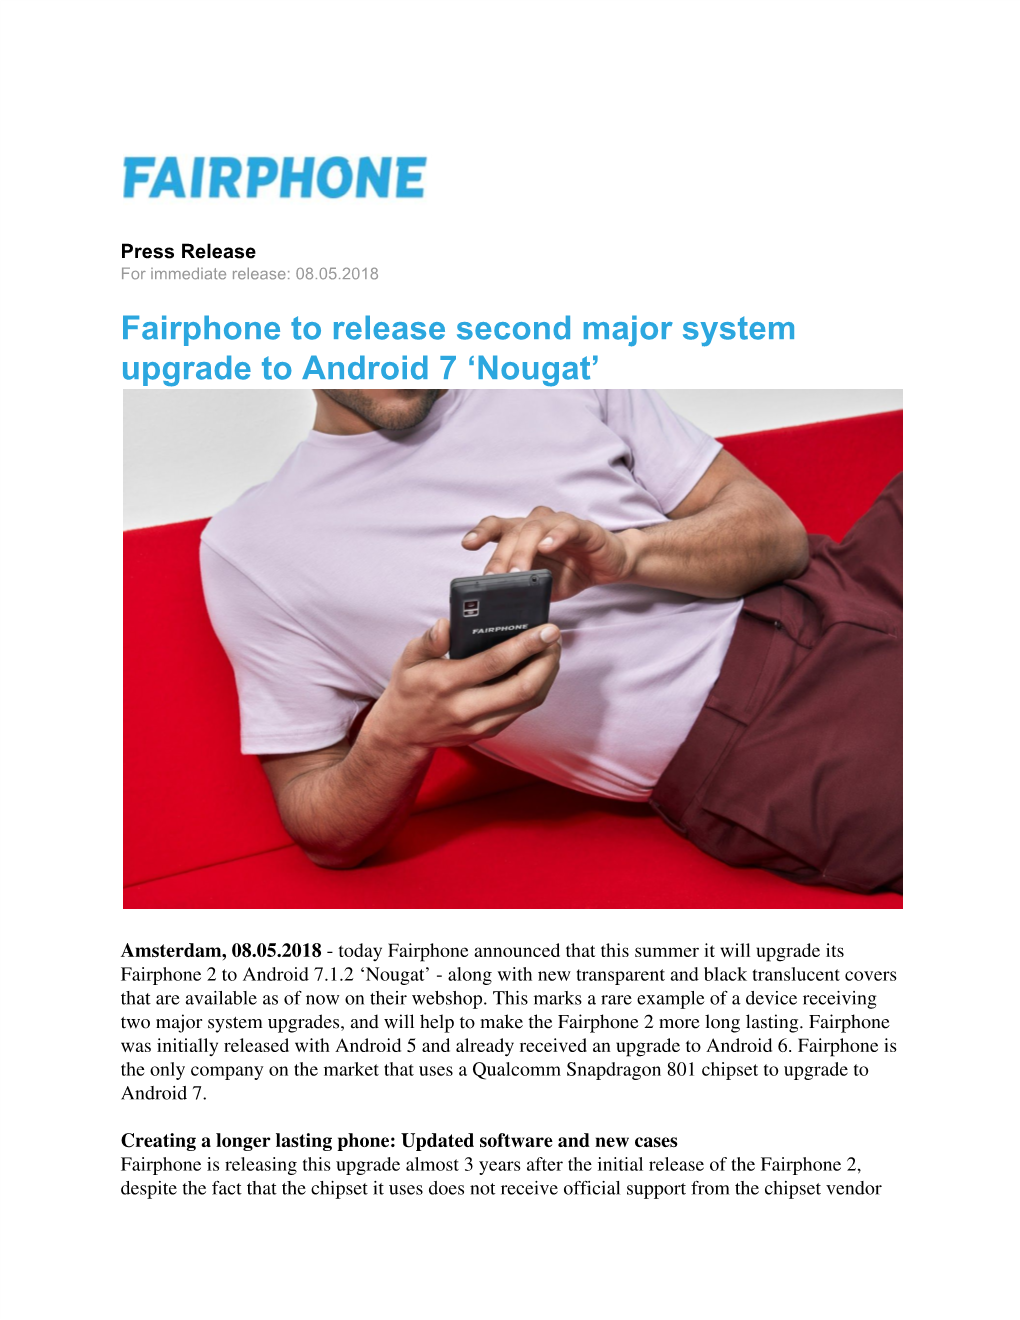 Fairphone to Release Second Major System Upgrade to Android 7 'Nougat'